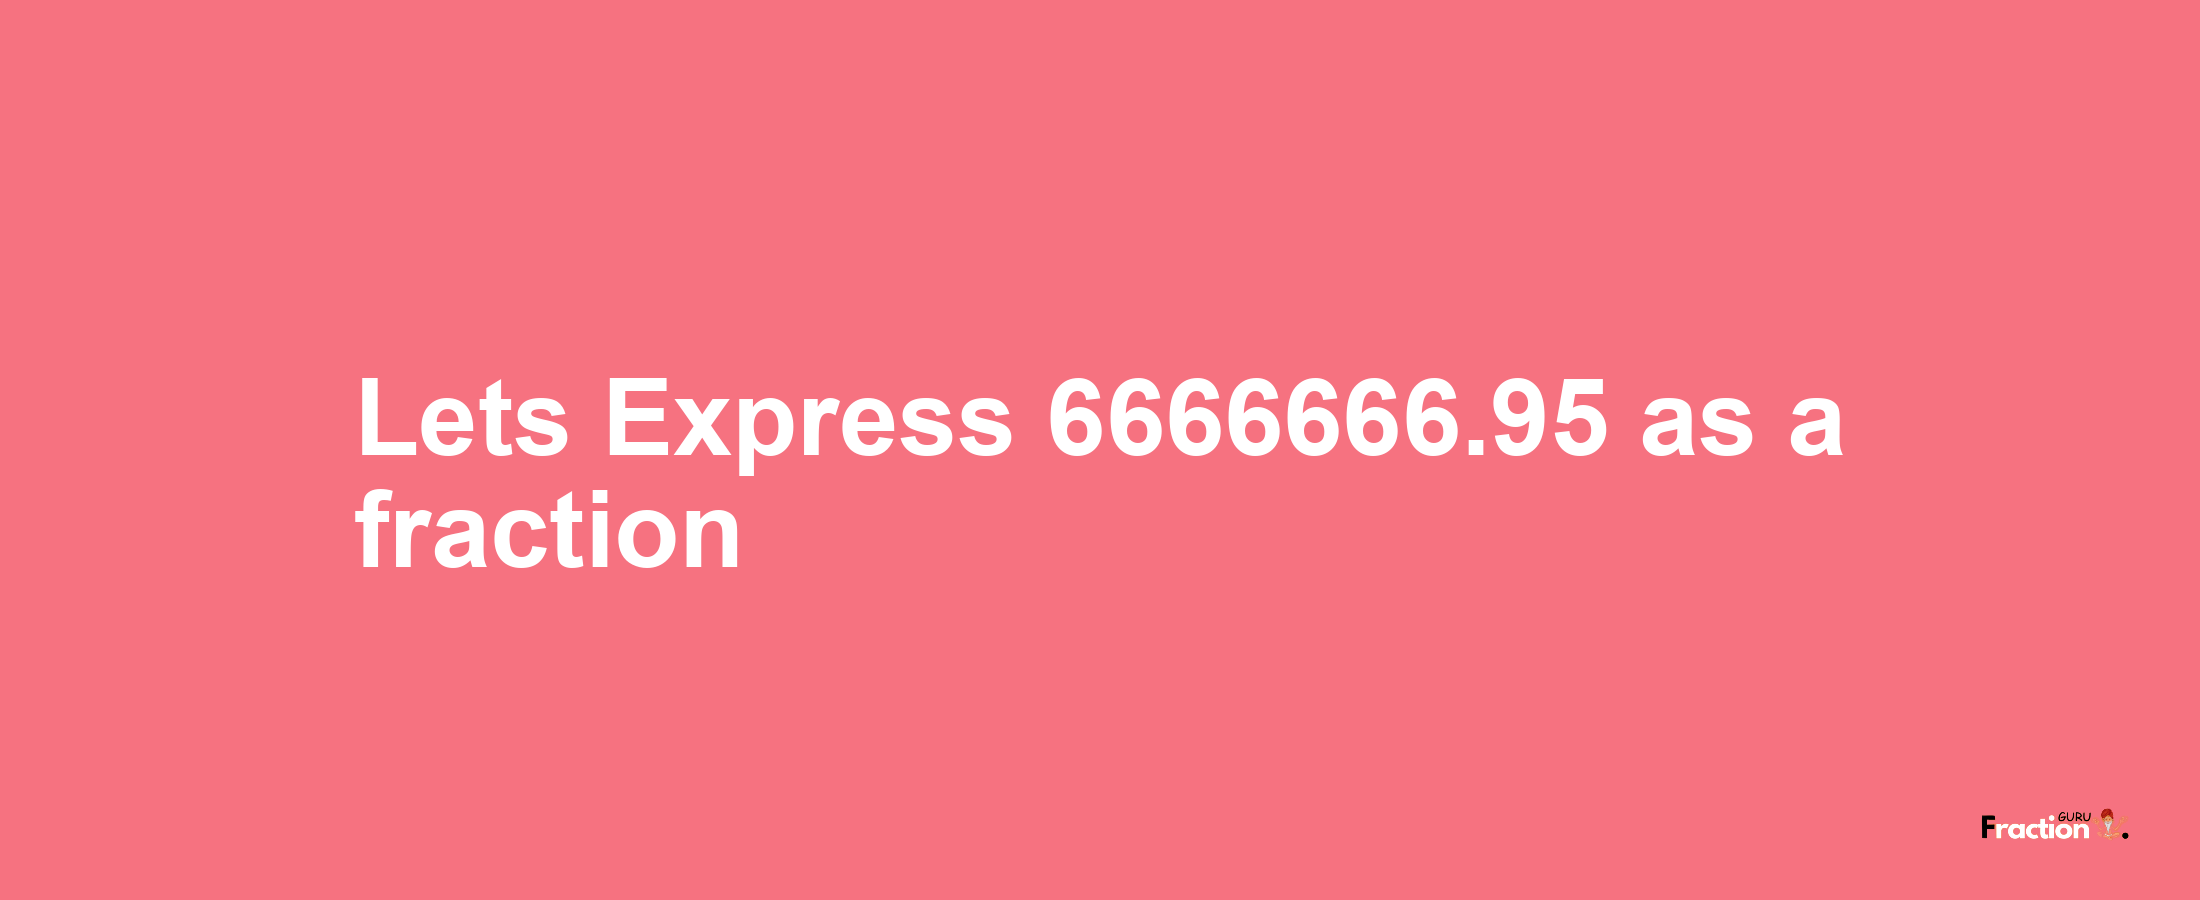 Lets Express 6666666.95 as afraction